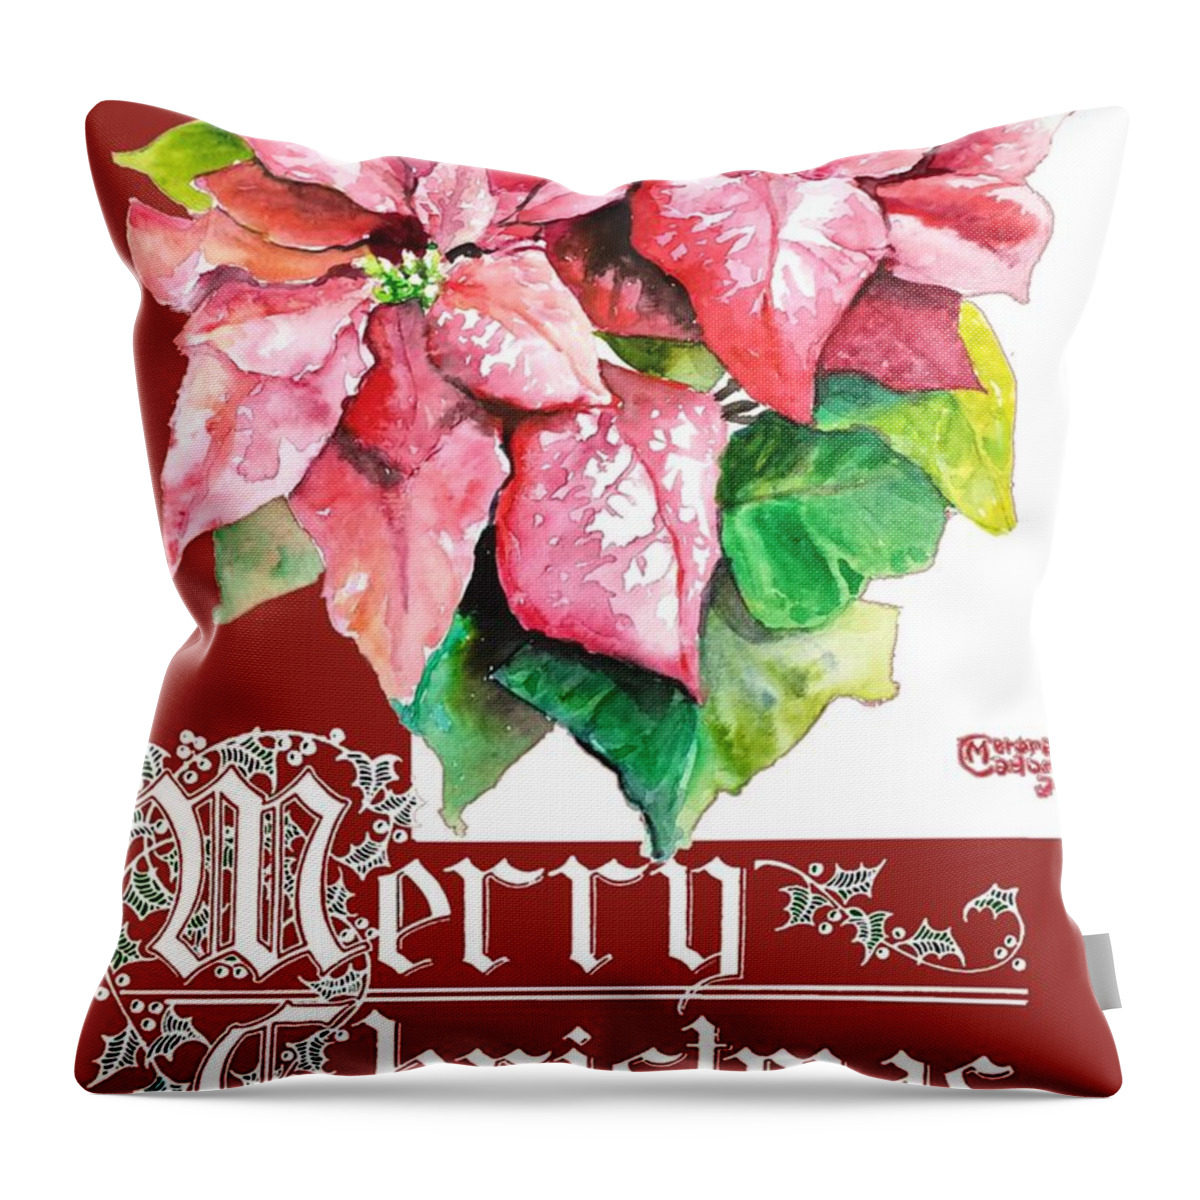 Merry Christmas Throw Pillow featuring the painting Merry Christmas by Merana Cadorette